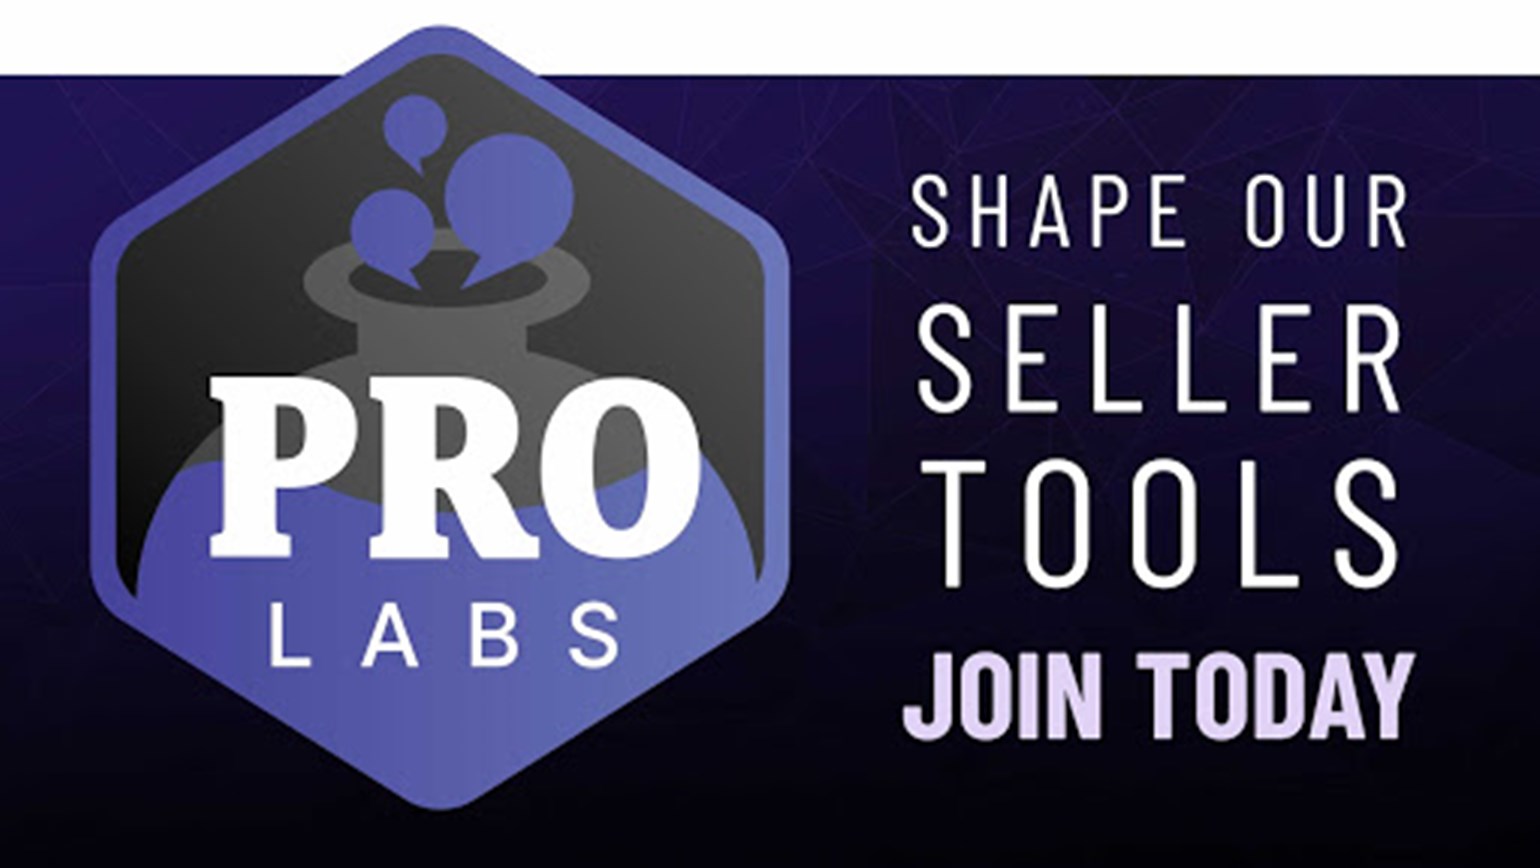 Shape Your Seller Tools by Joining Pro Labs Program